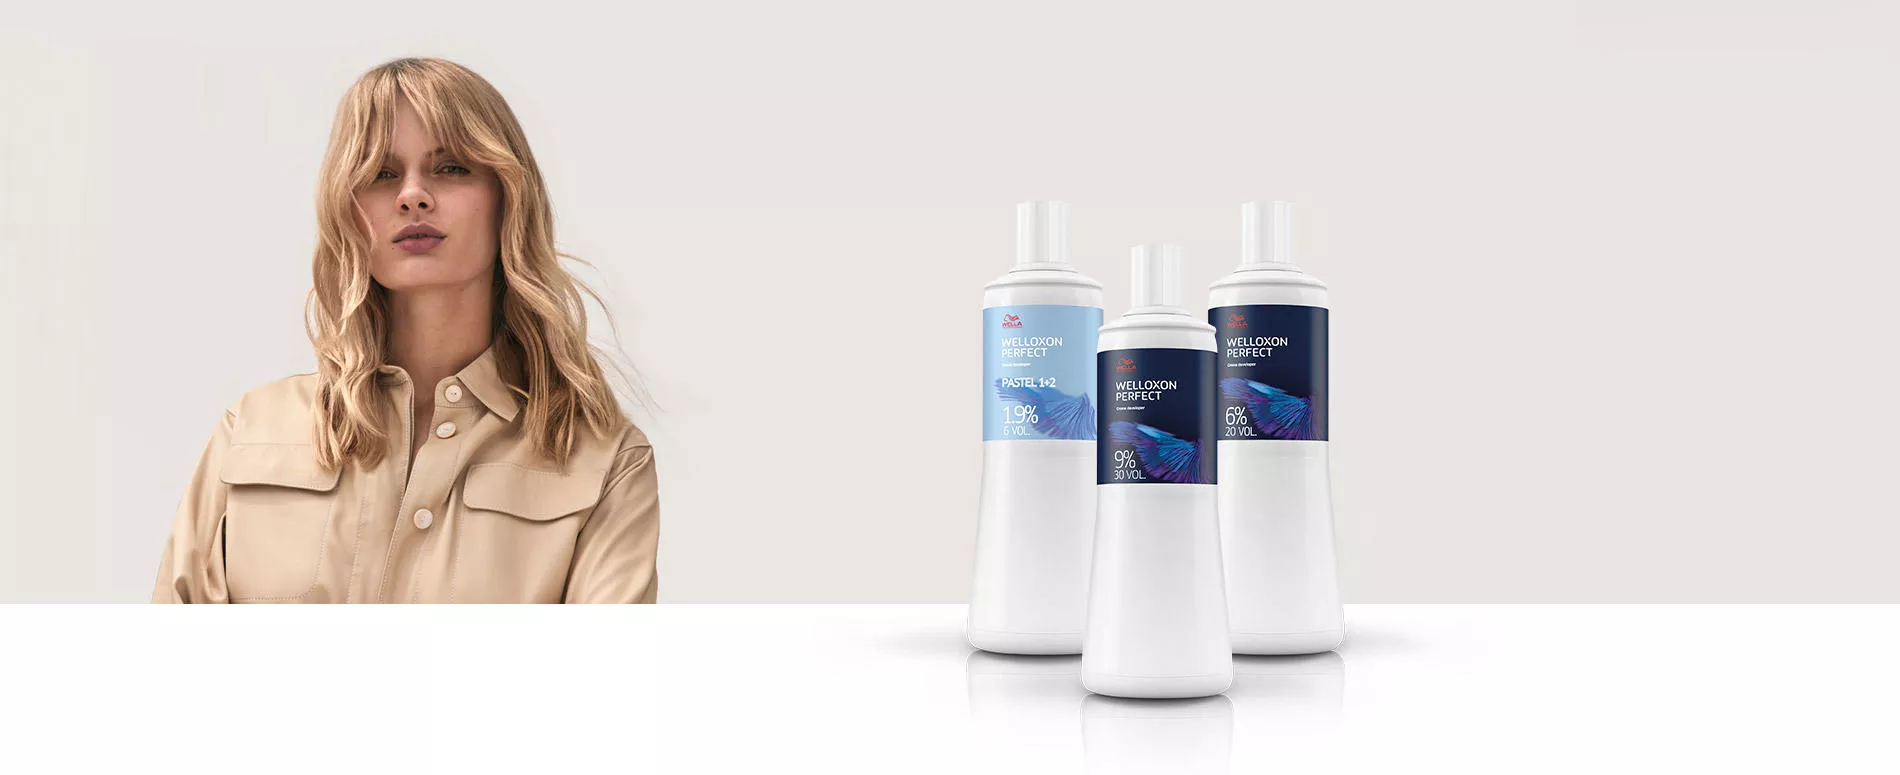 A woman with long, very dark, straight hair looking back over her shoulder, and 3 white bottles of Welloxon Perfect